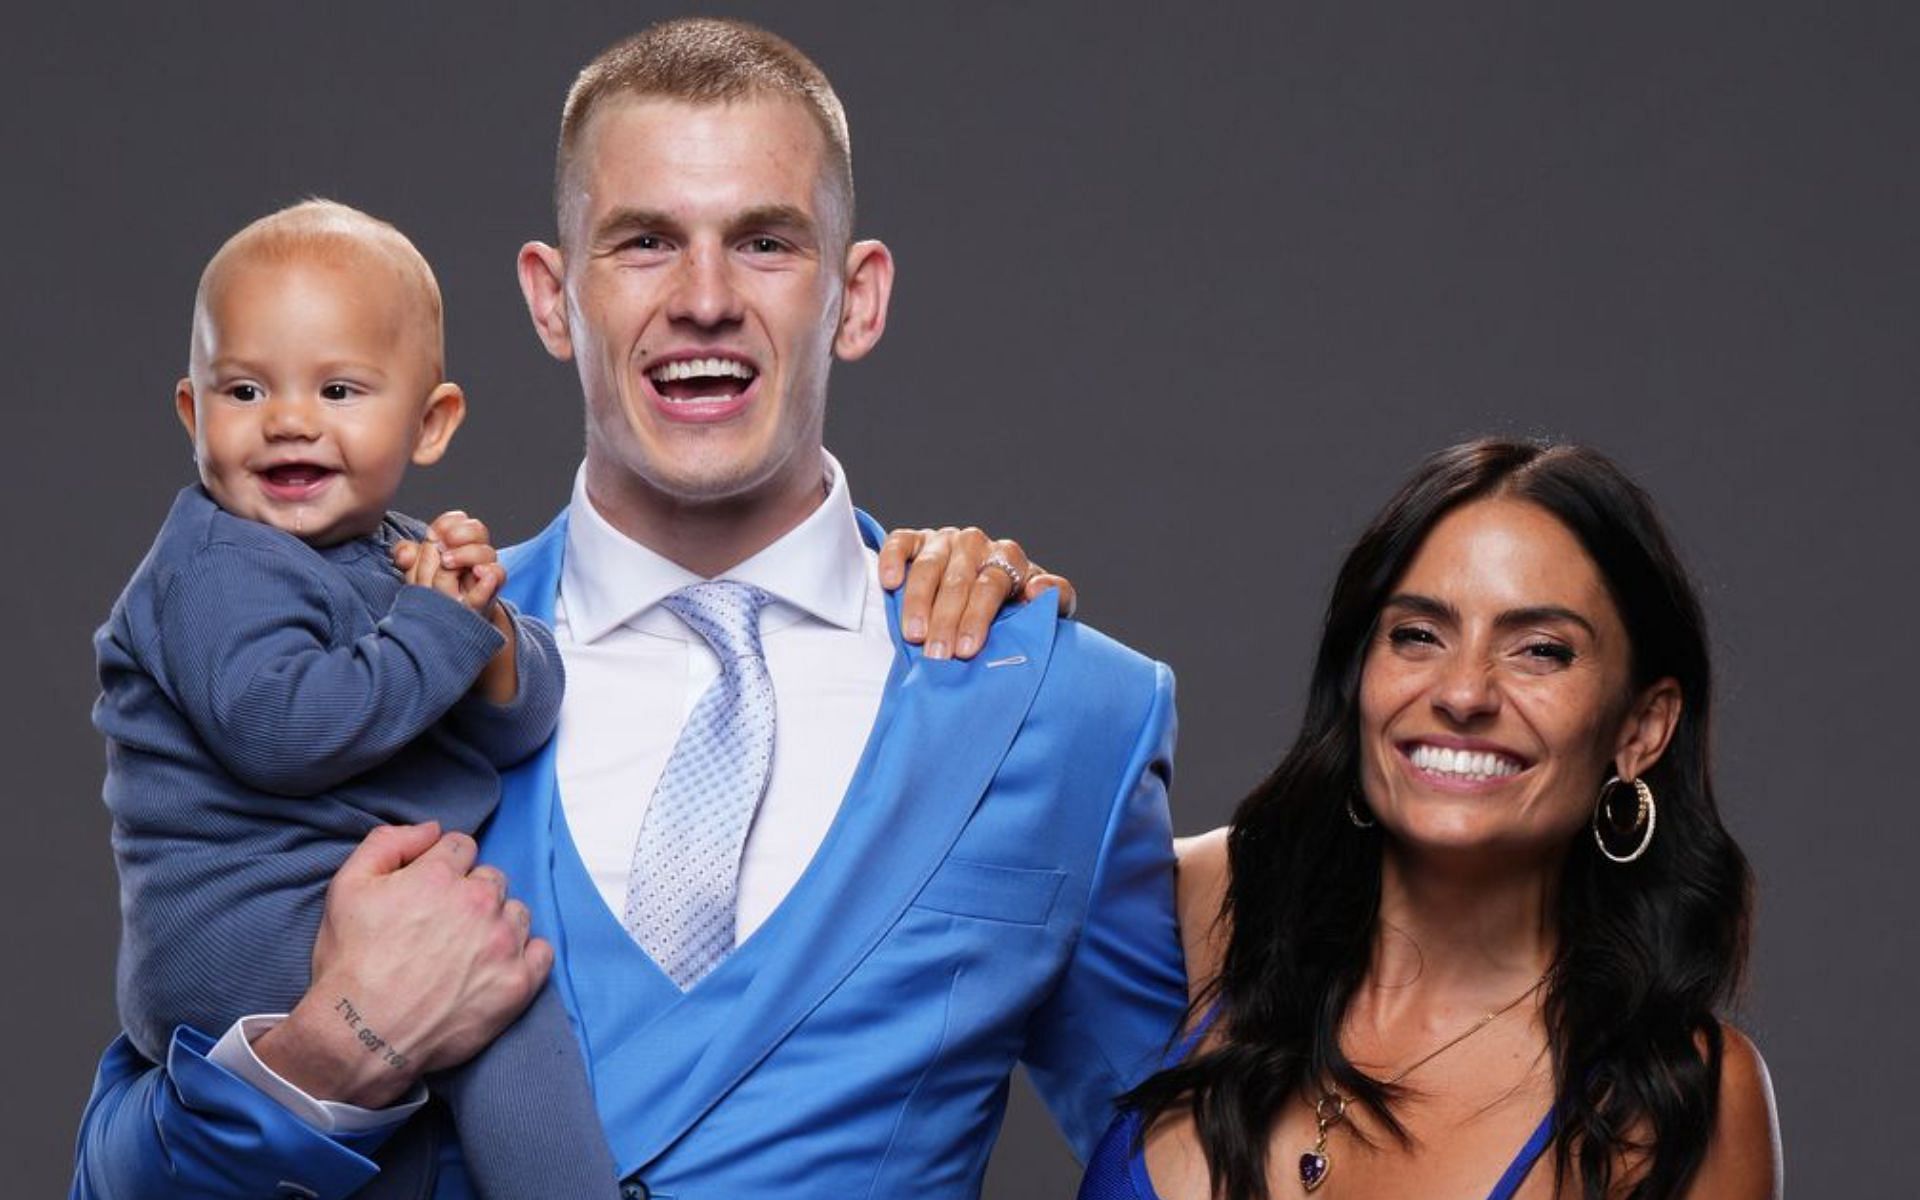 Ian Garry with his wife Layla Anna-Lee and son. (via Getty Images)